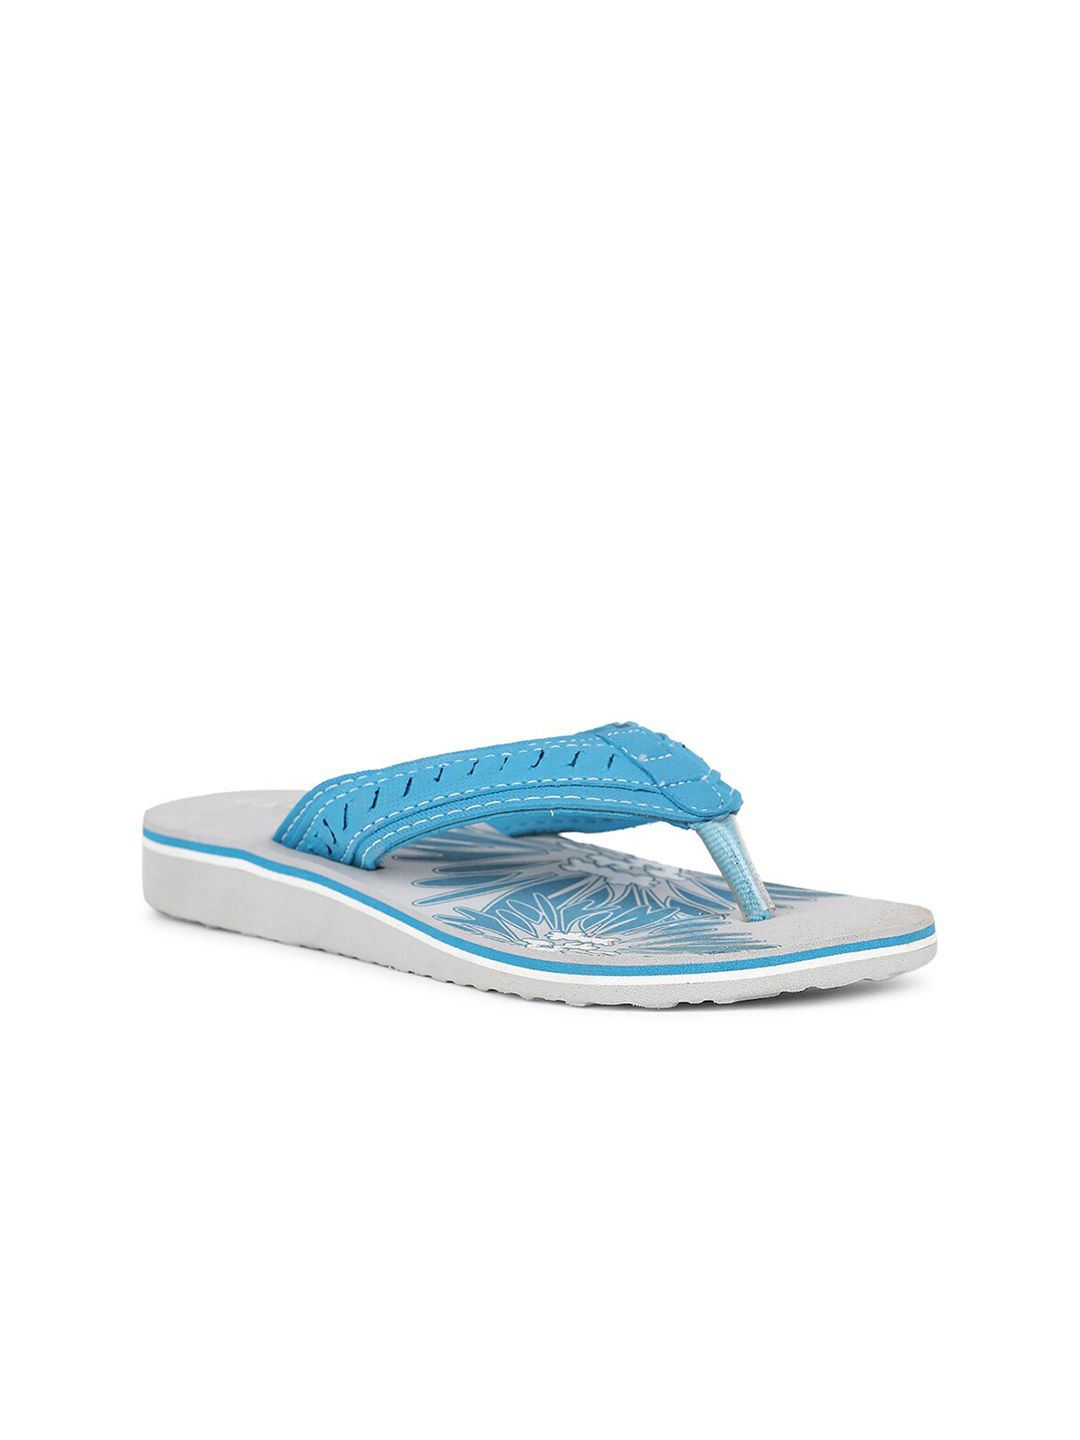 Bata Women Blue & Grey Printed Room Slippers Price in India